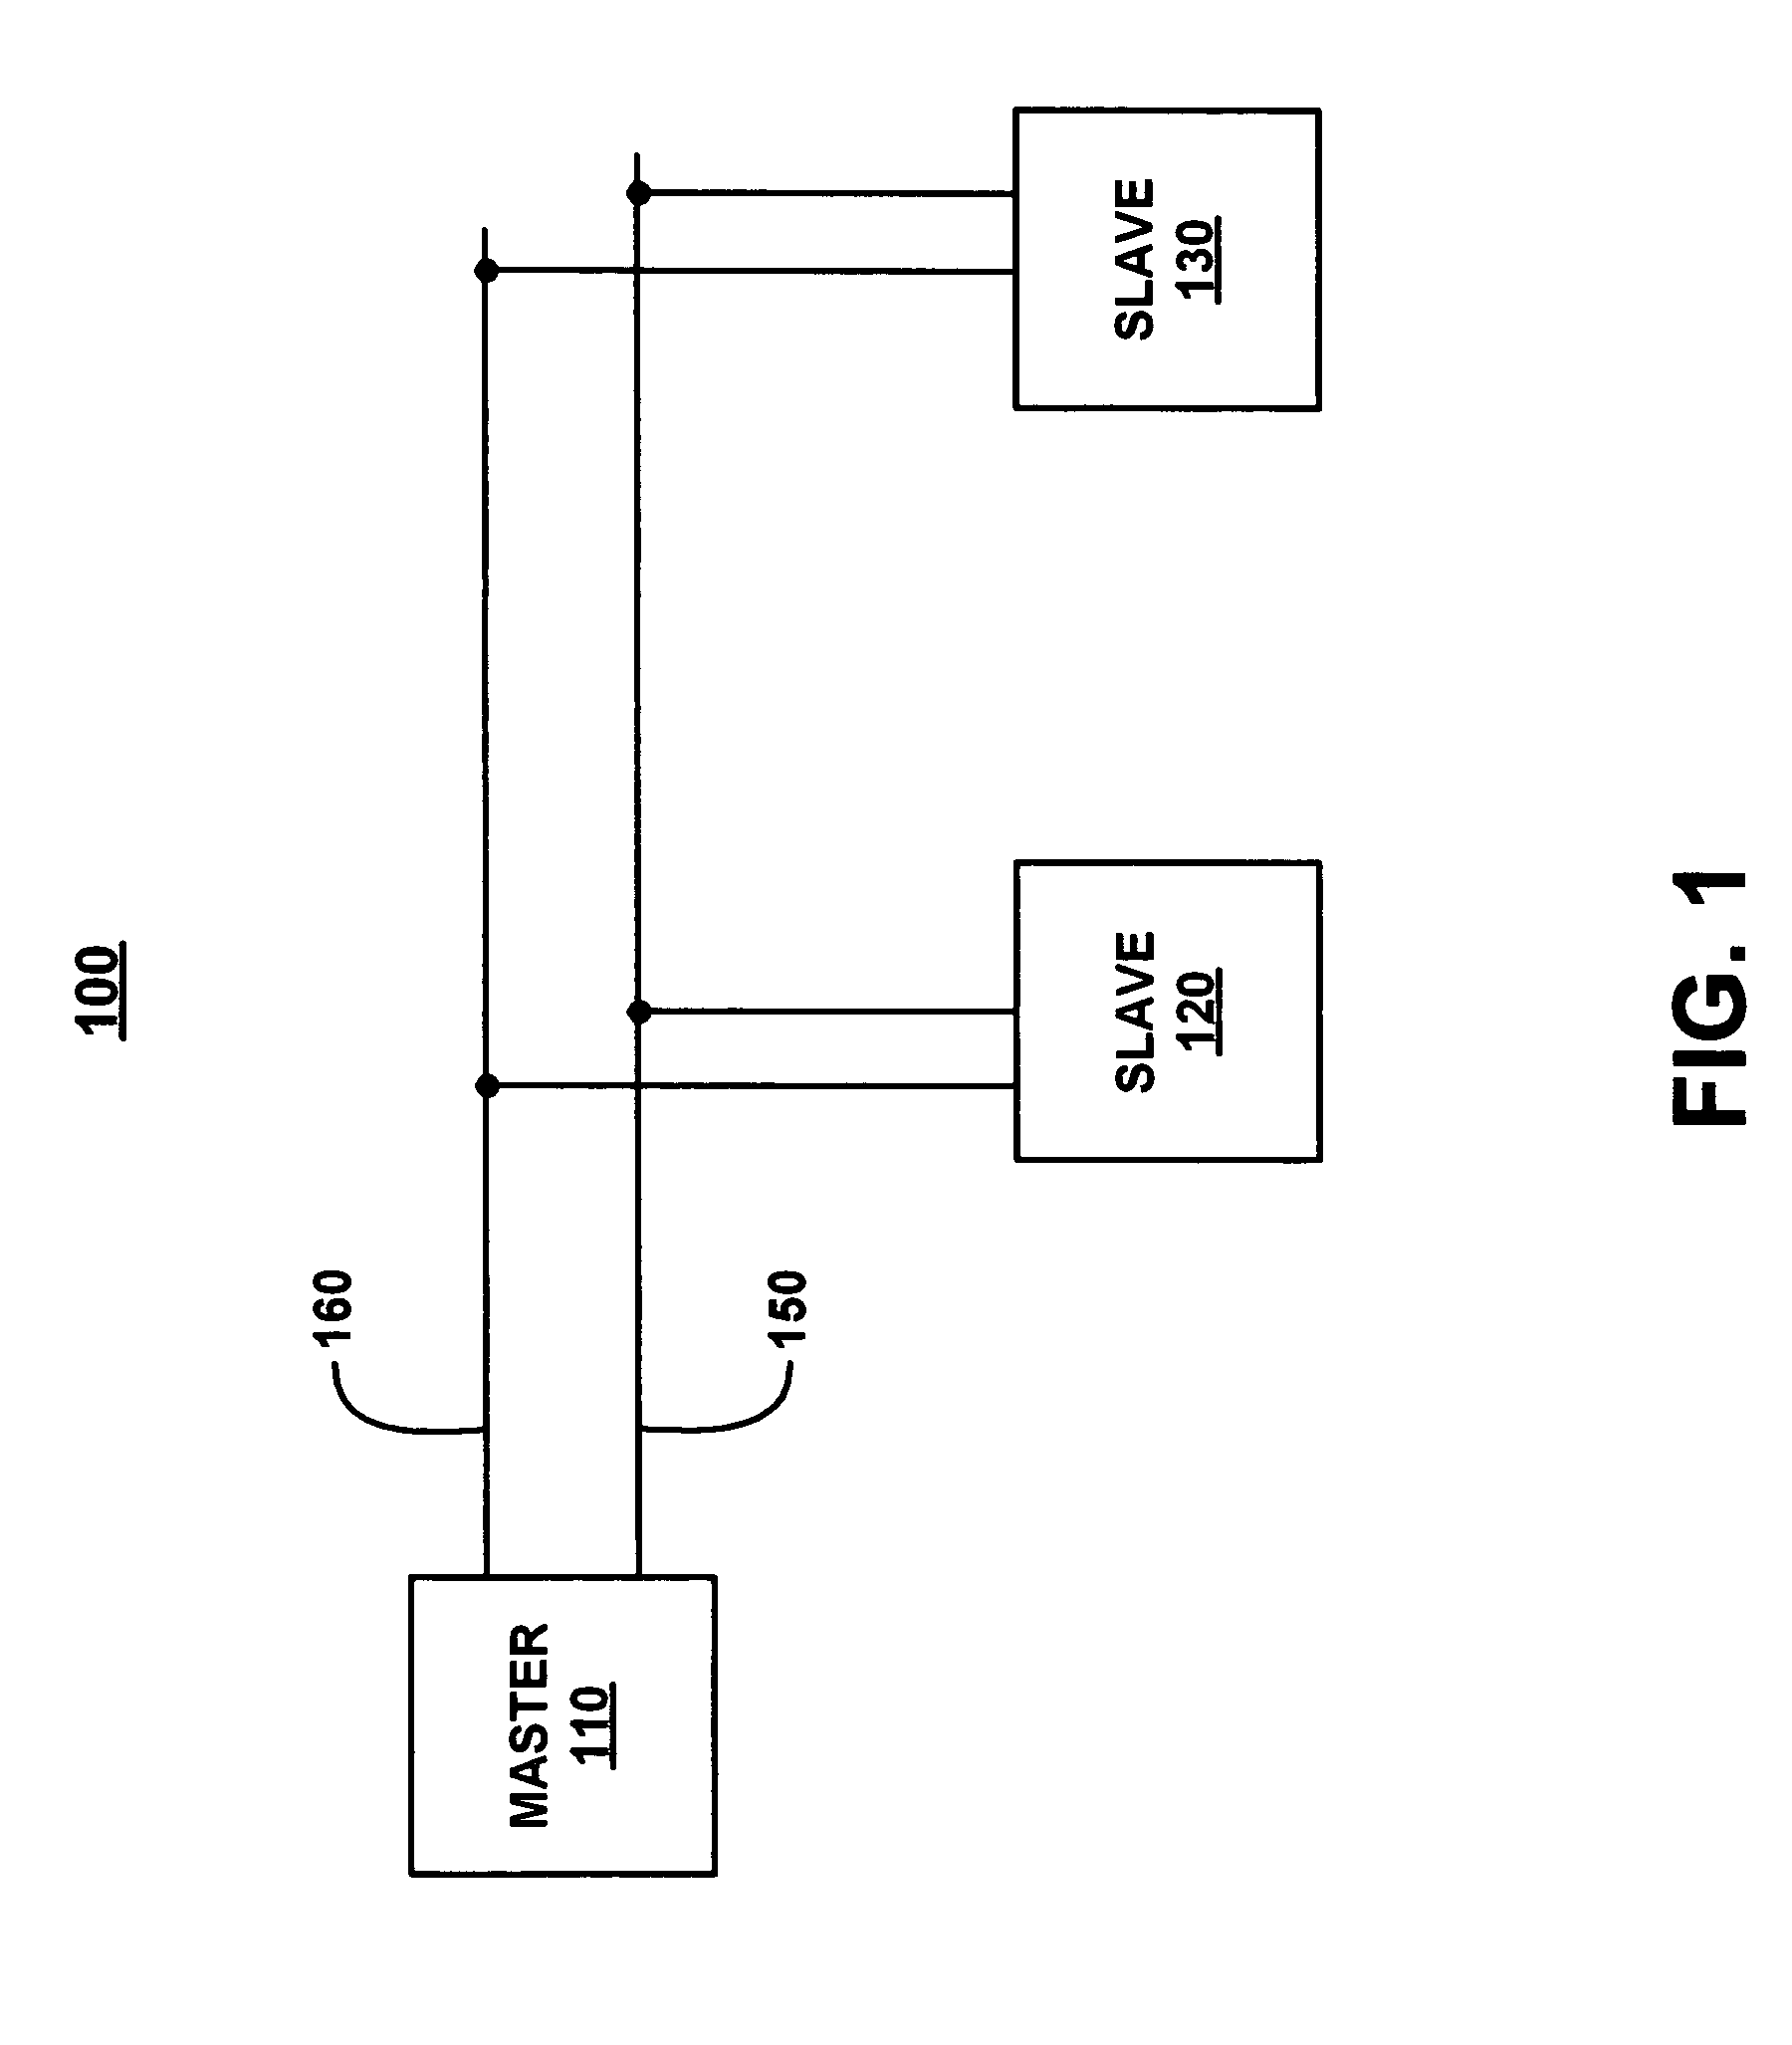 System and method of mastering a serial bus